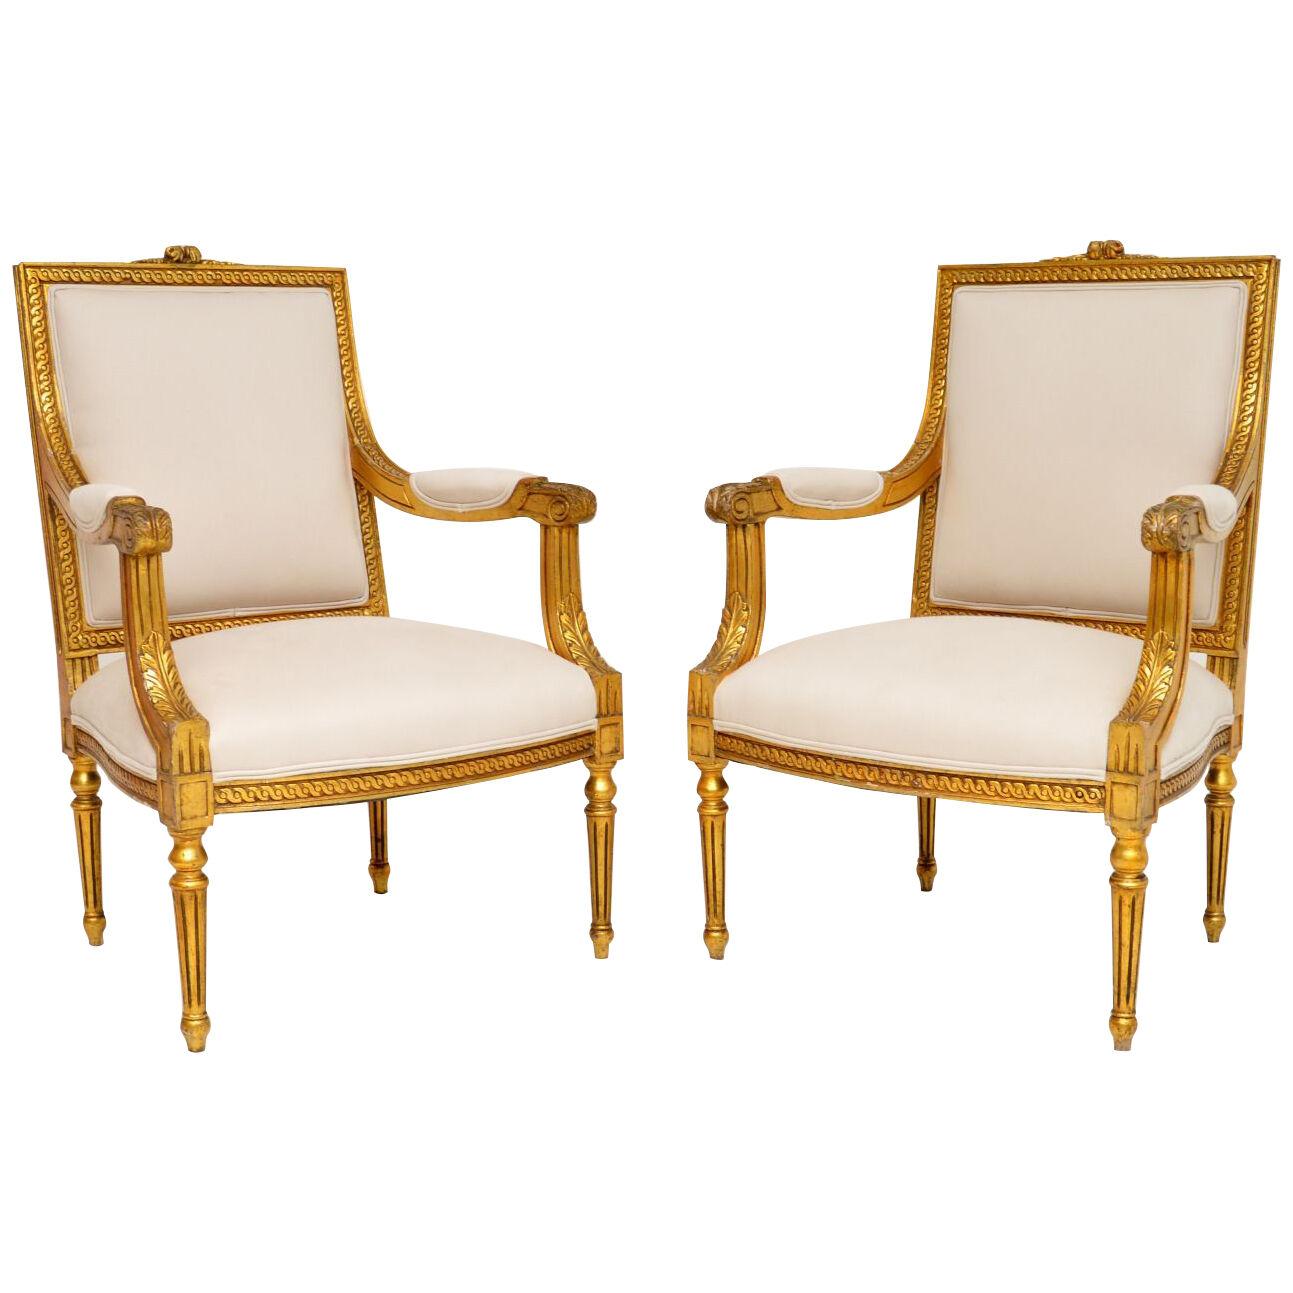 Pair of Antique French Gilt Wood Armchairs